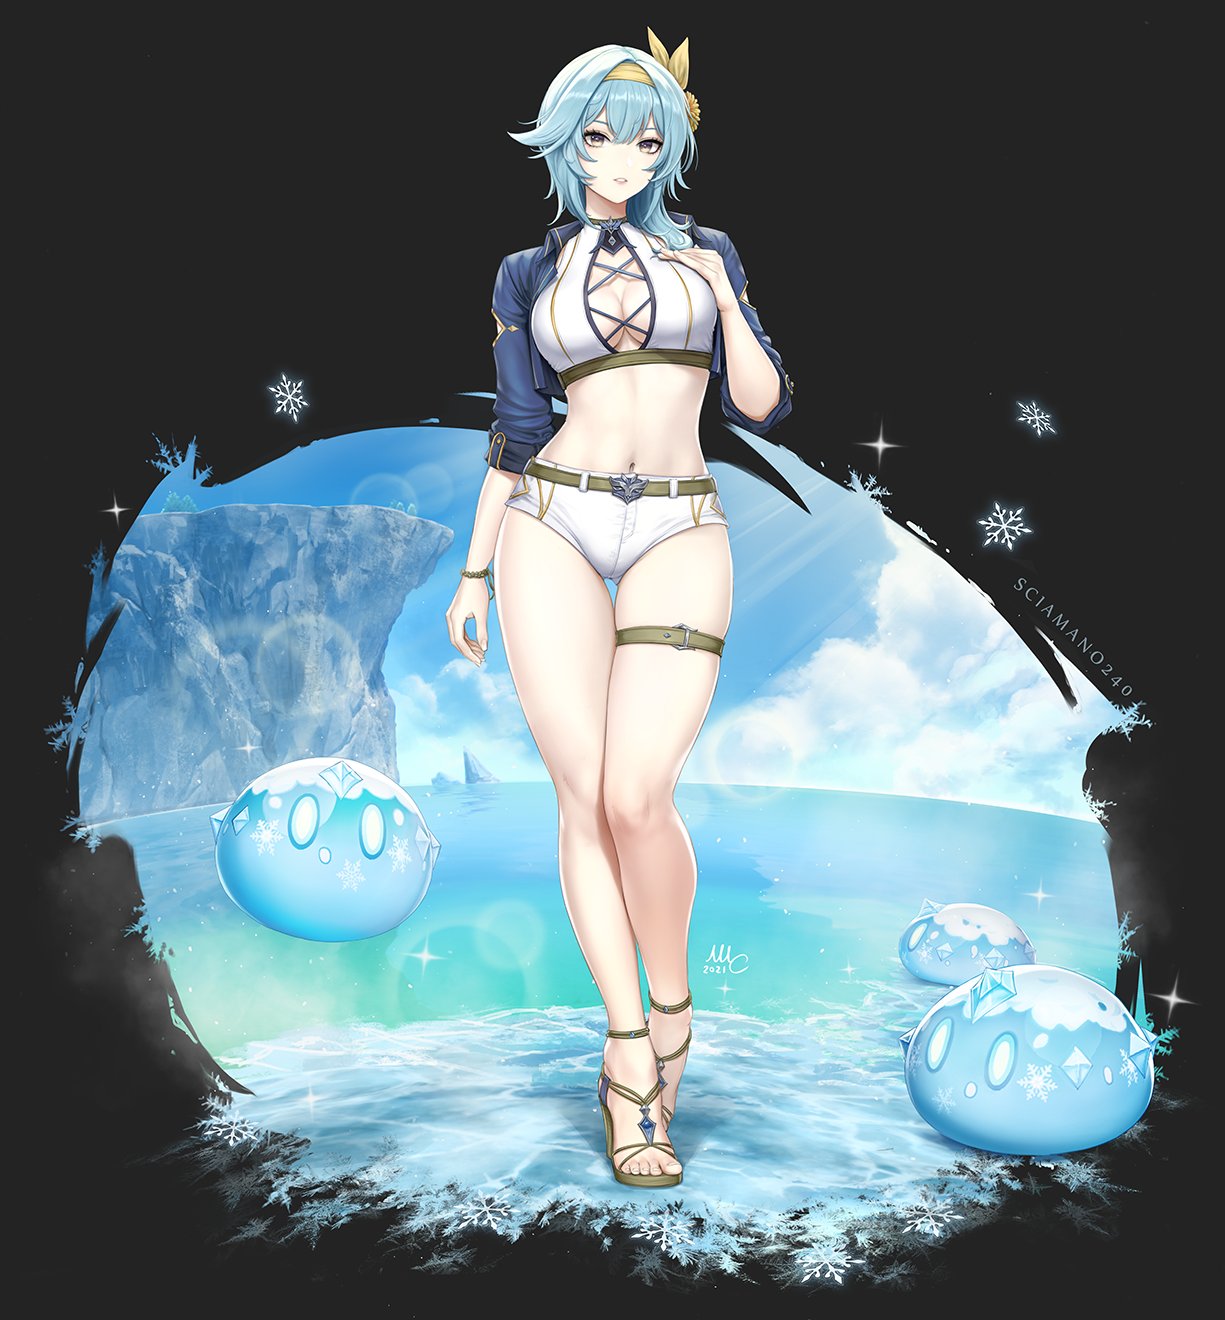 Sciamano240 S Art Summer Eula From Genshin Impact I M So Hyped For Future Summer Skins And She S Not Even Out Yet